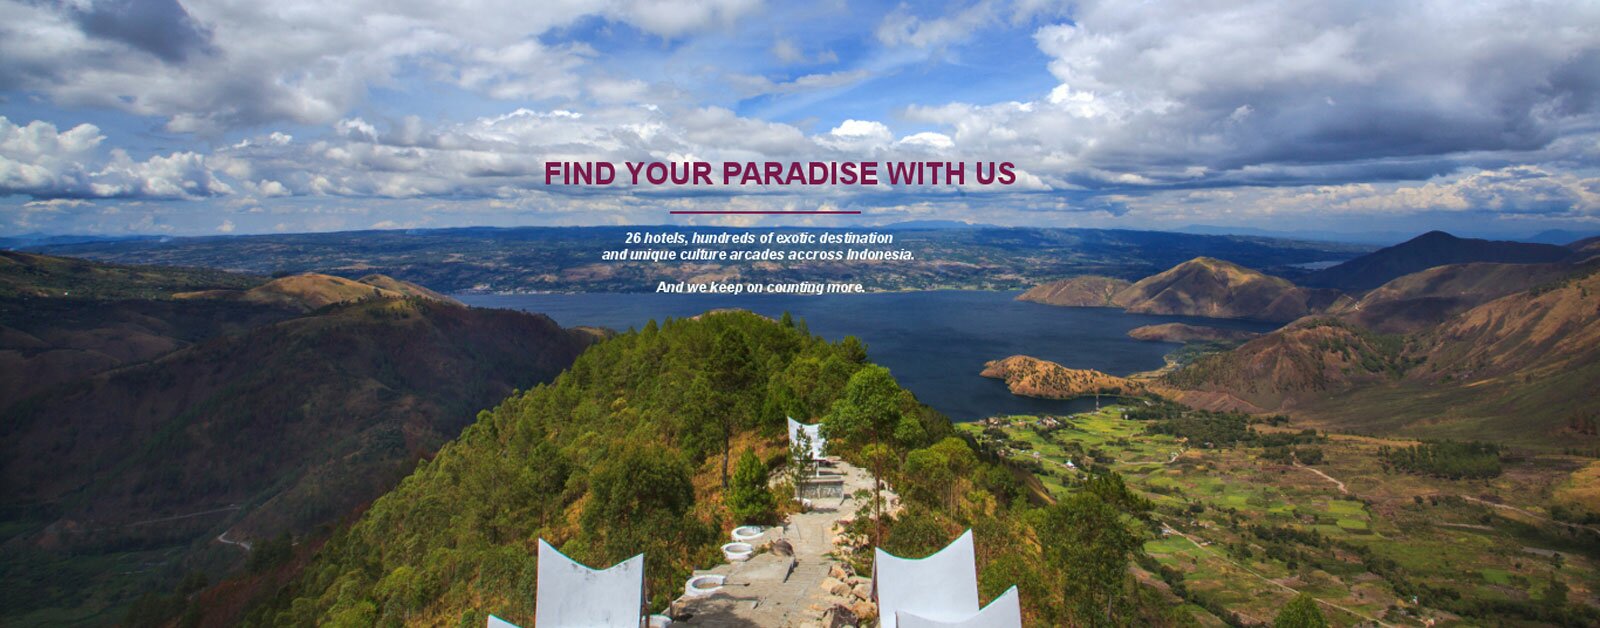 Find Your Paradise With Us